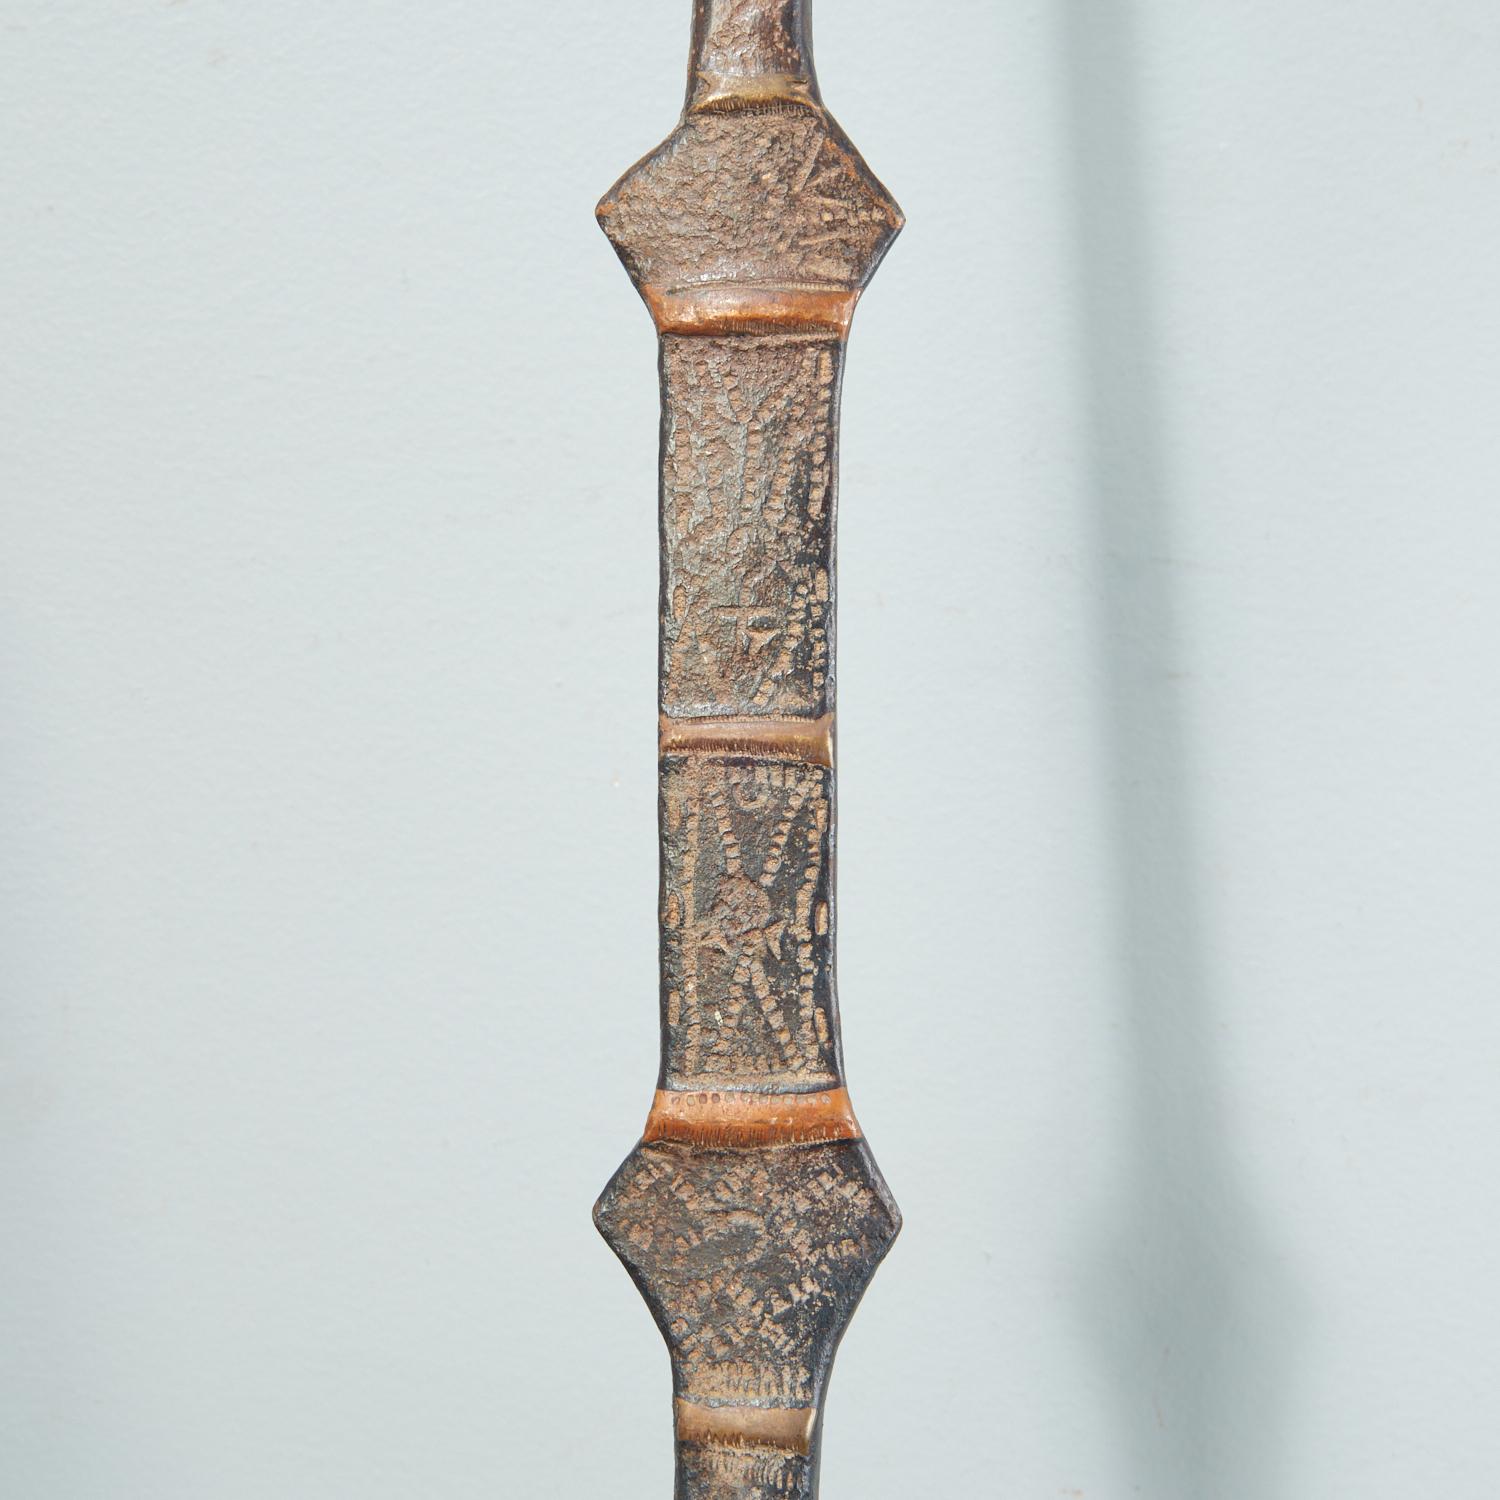 19th c., Niger Region, currencies of forged iron, each with long stem incised with geometric decoration, terminating in a horseshoe-shaped blade.

Dimensions:
58